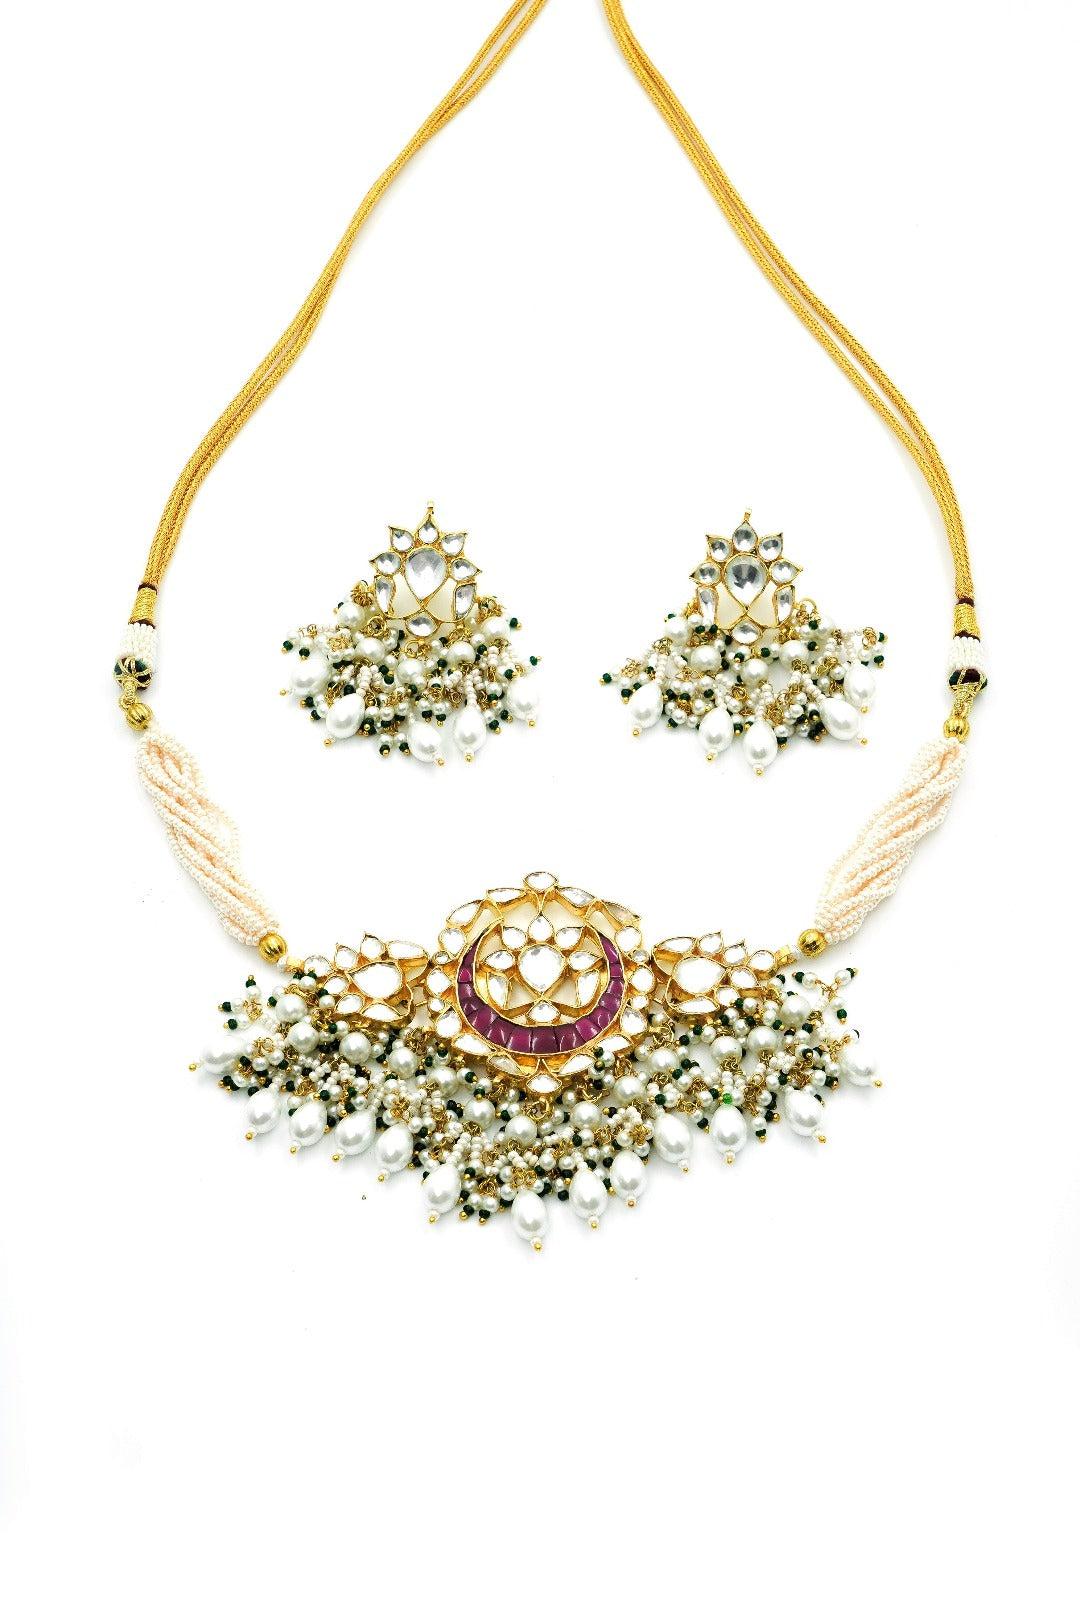 Heritage Glow Kundan Choker with Earrings (Necklace and Earrings Set) - QUEENS JEWELS